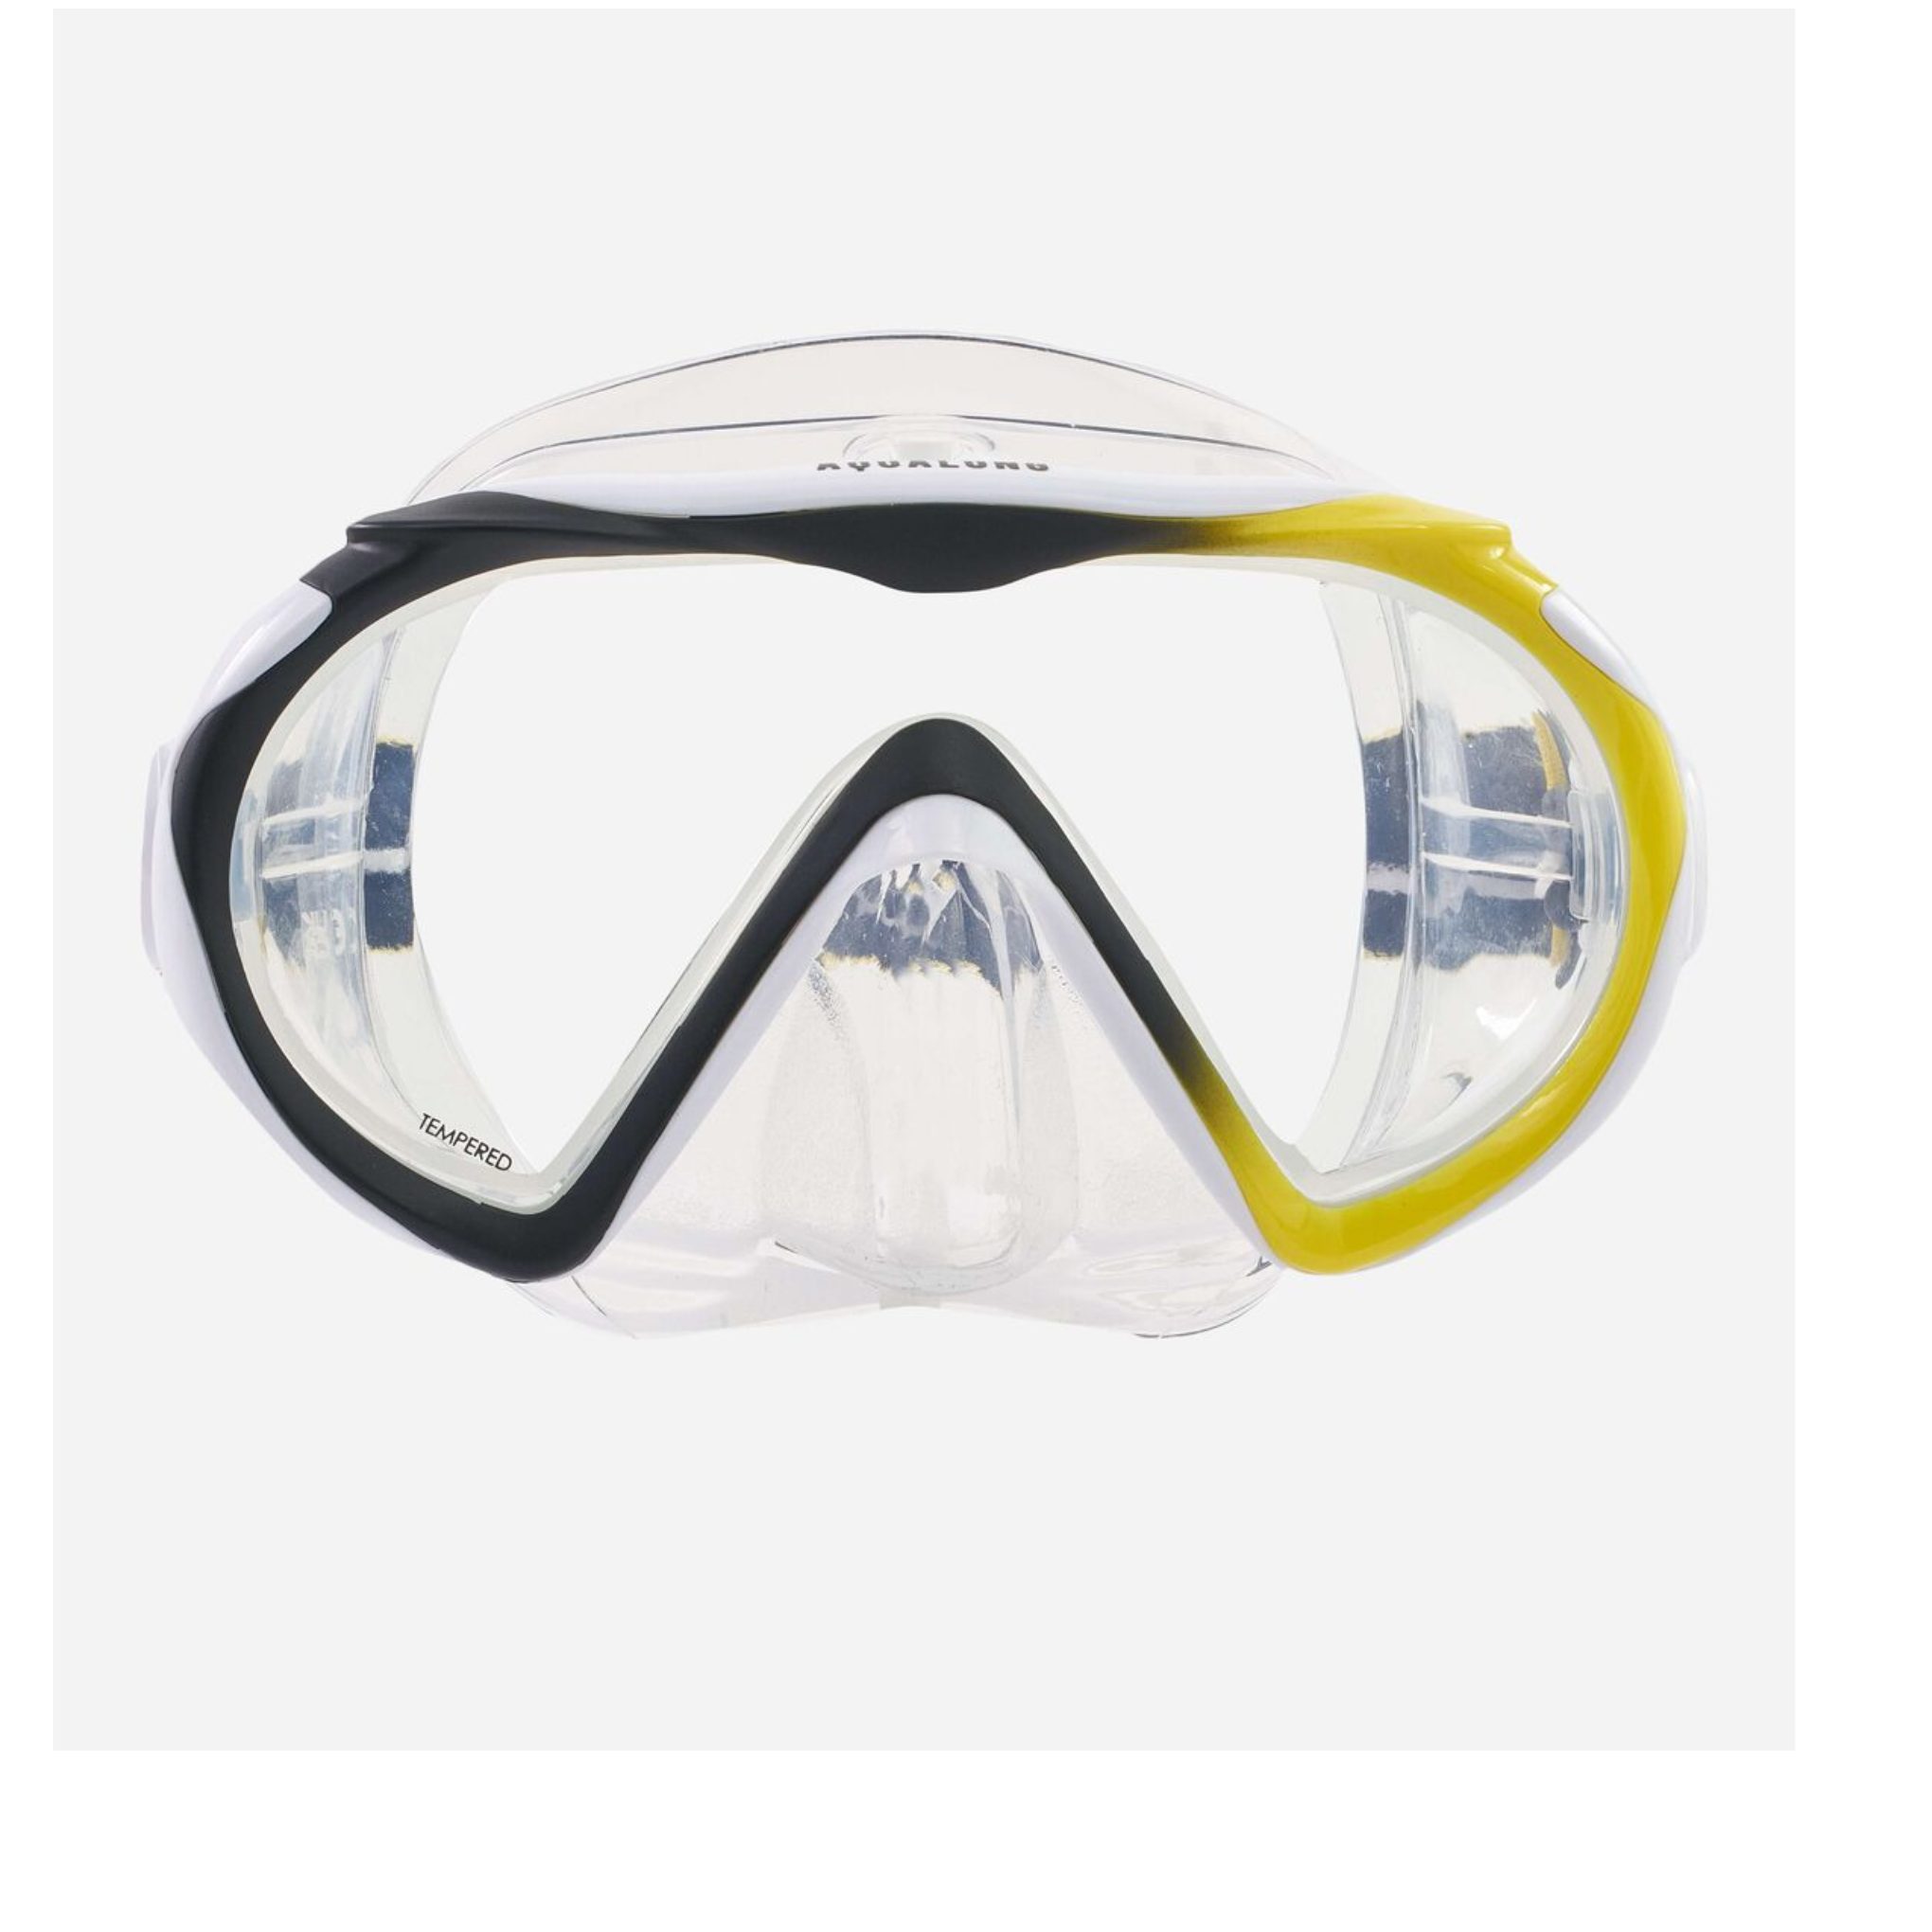 Aqualung Taucherbrille COMPASS BLACK YELLOW